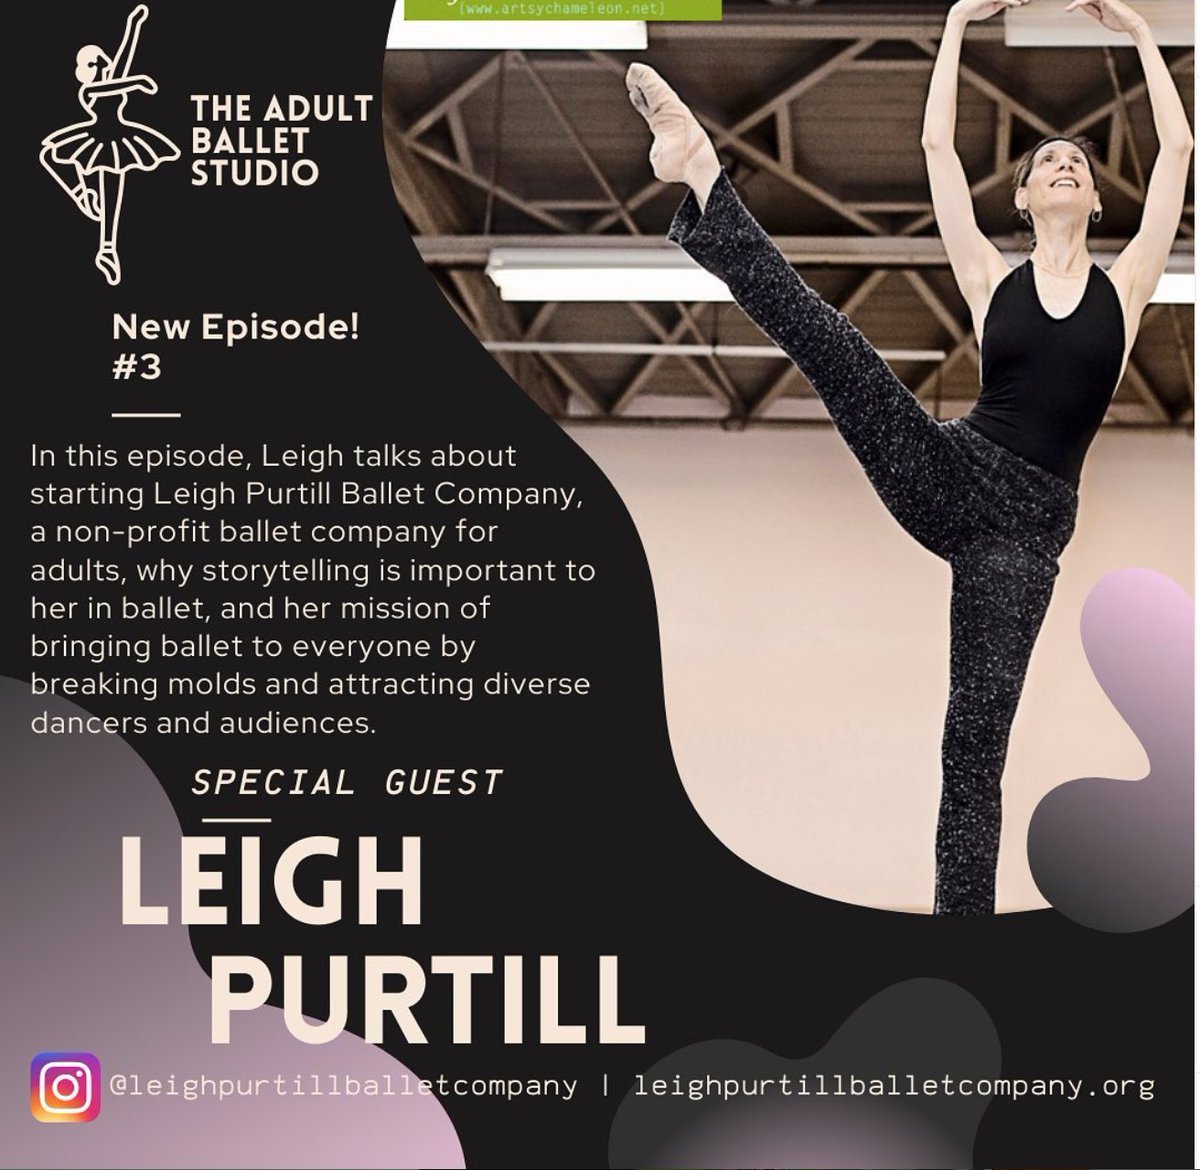 Get to know company director Leigh Purtill in the latest edition of the #AdultBalletStudio podcast. Leigh discusses #Cracked , the books she authored and if #SweetSorrow is coming out of the crypt anytime soon. Give this fascinating show a listen ! podcasts.apple.com/us/podcast/the…